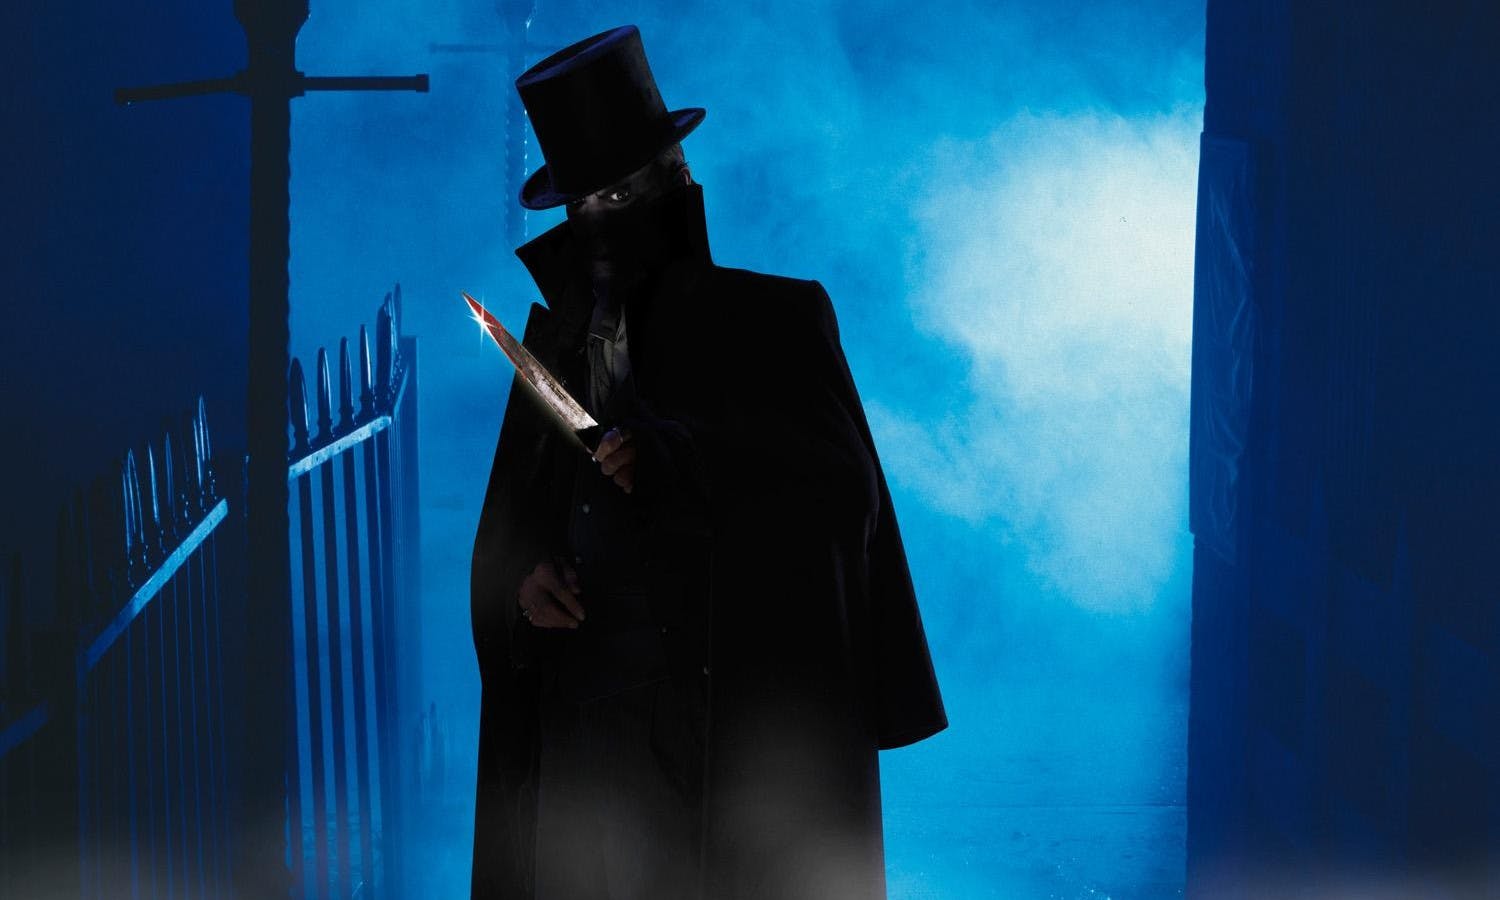 Jack the Ripper Tour and The London Dungeon